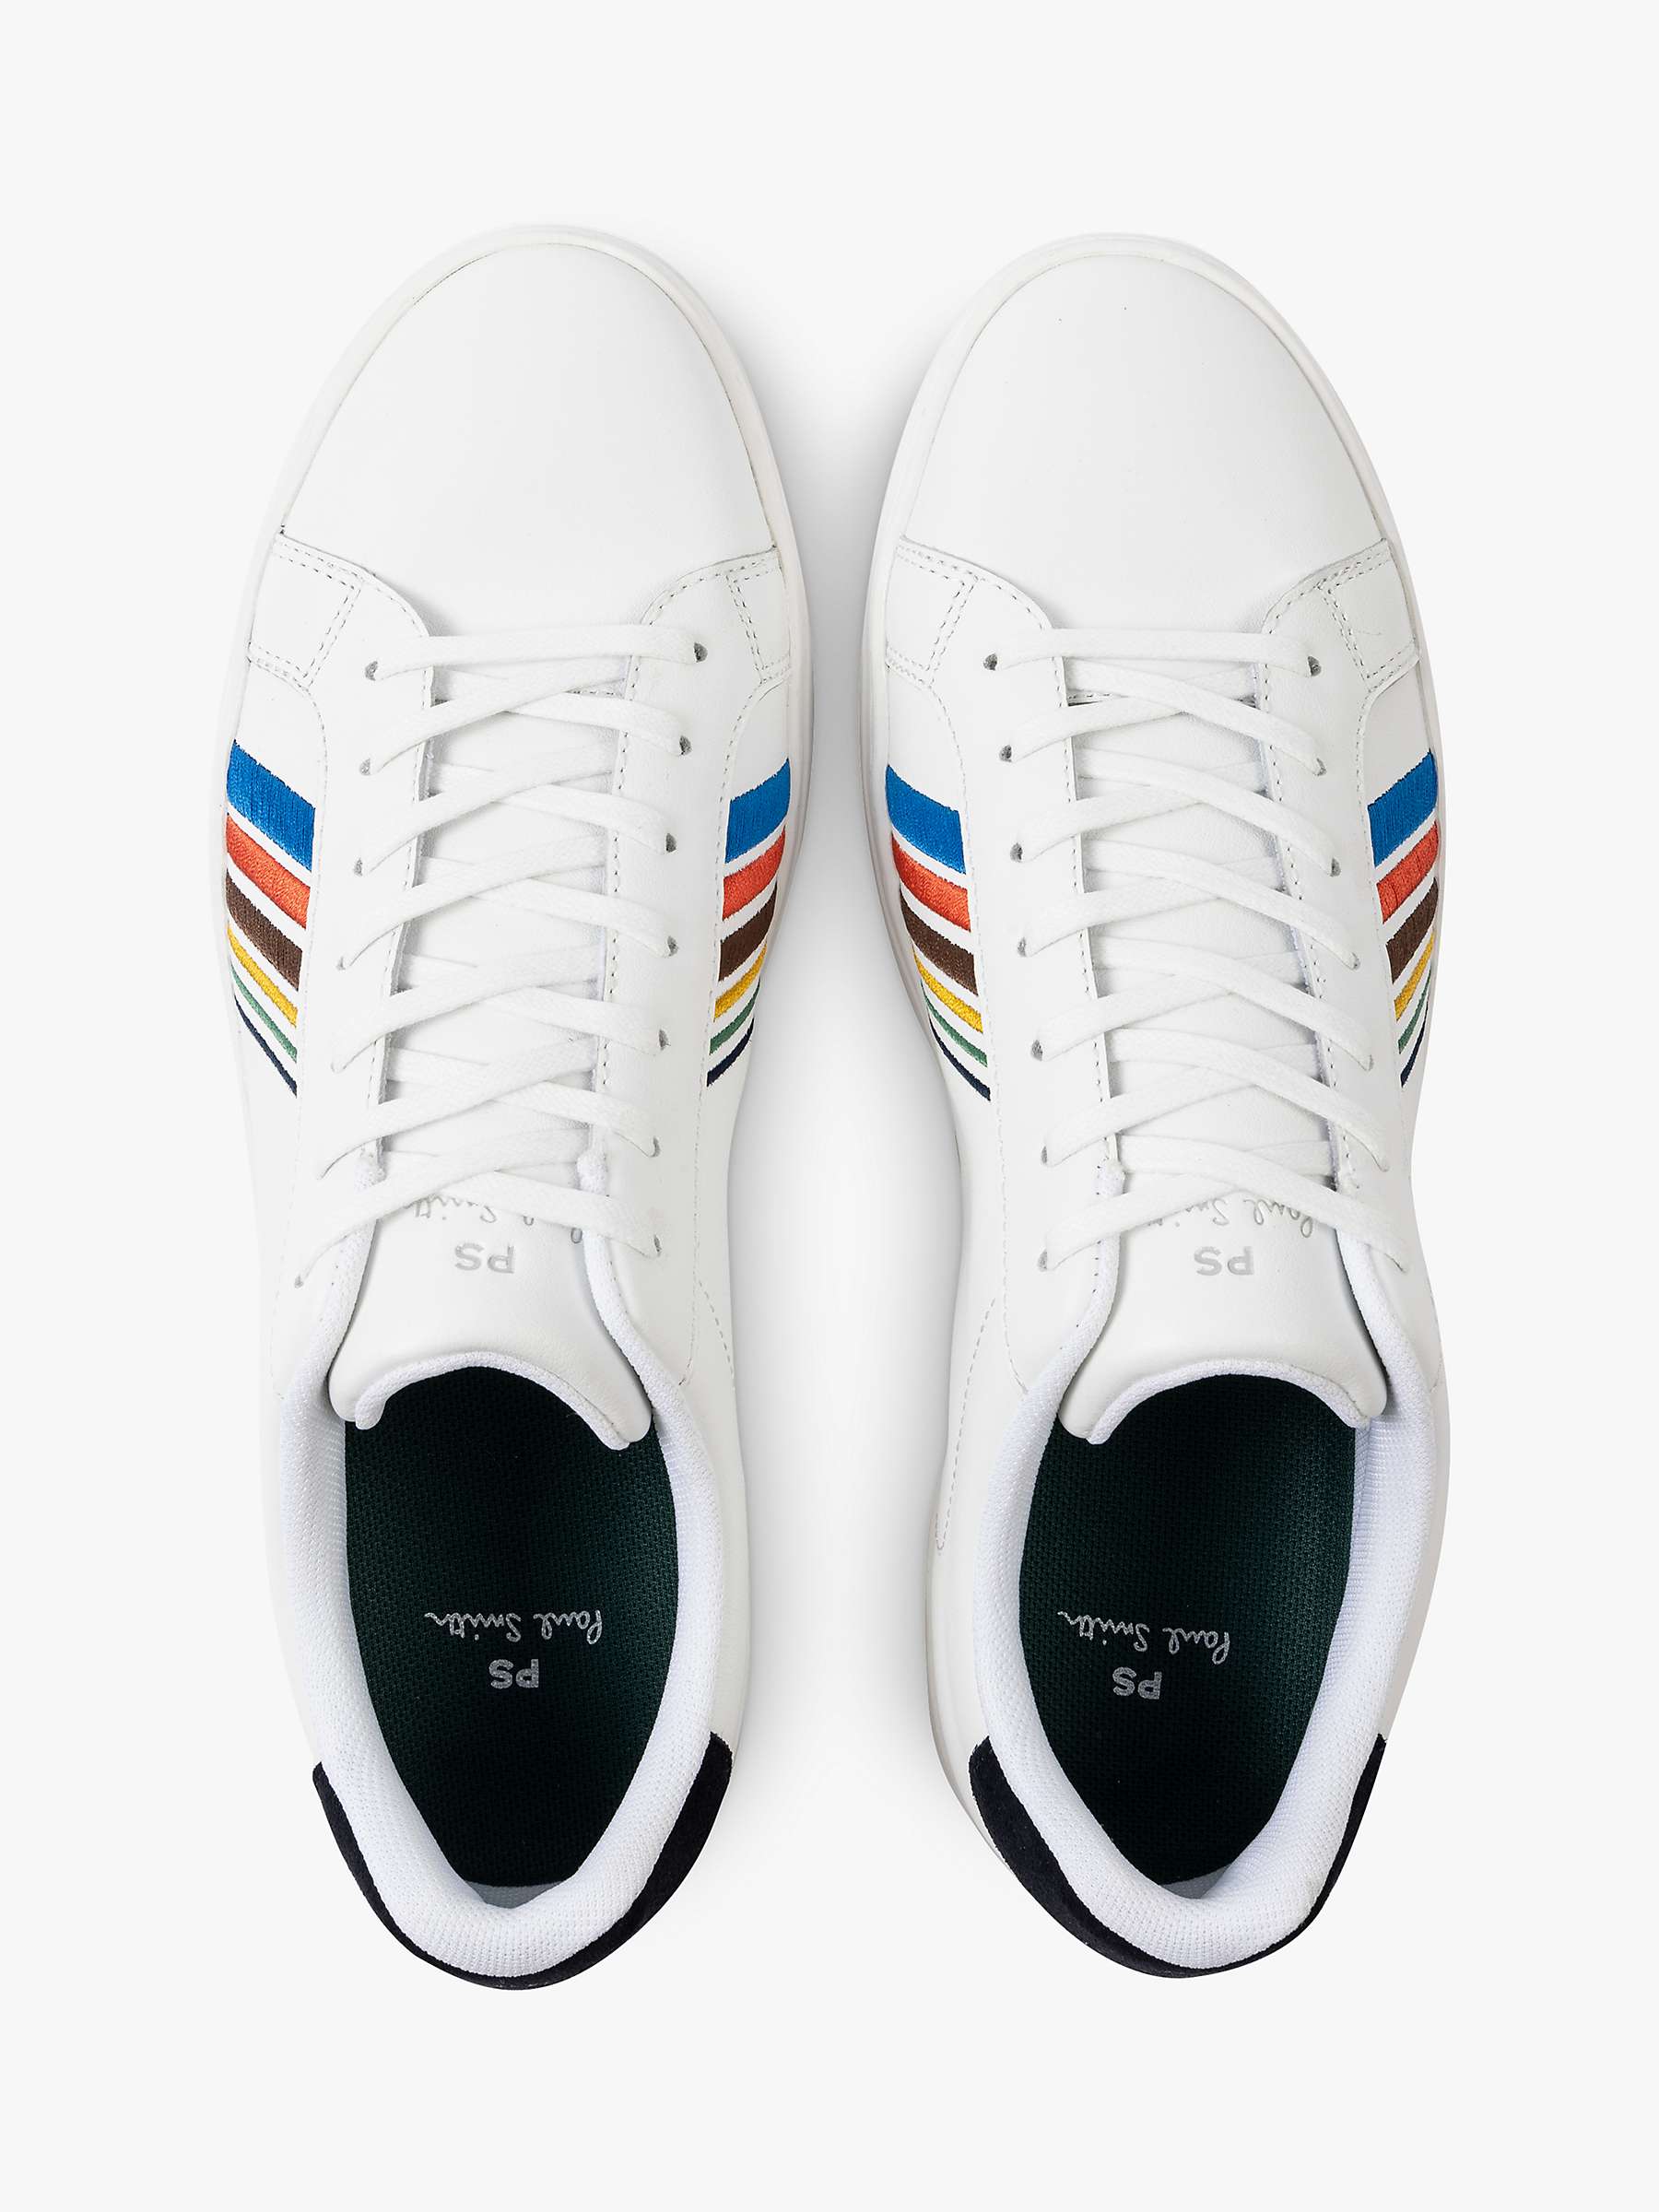 Buy Paul Smith Rex Embroidery Shoes, White/Multi Online at johnlewis.com